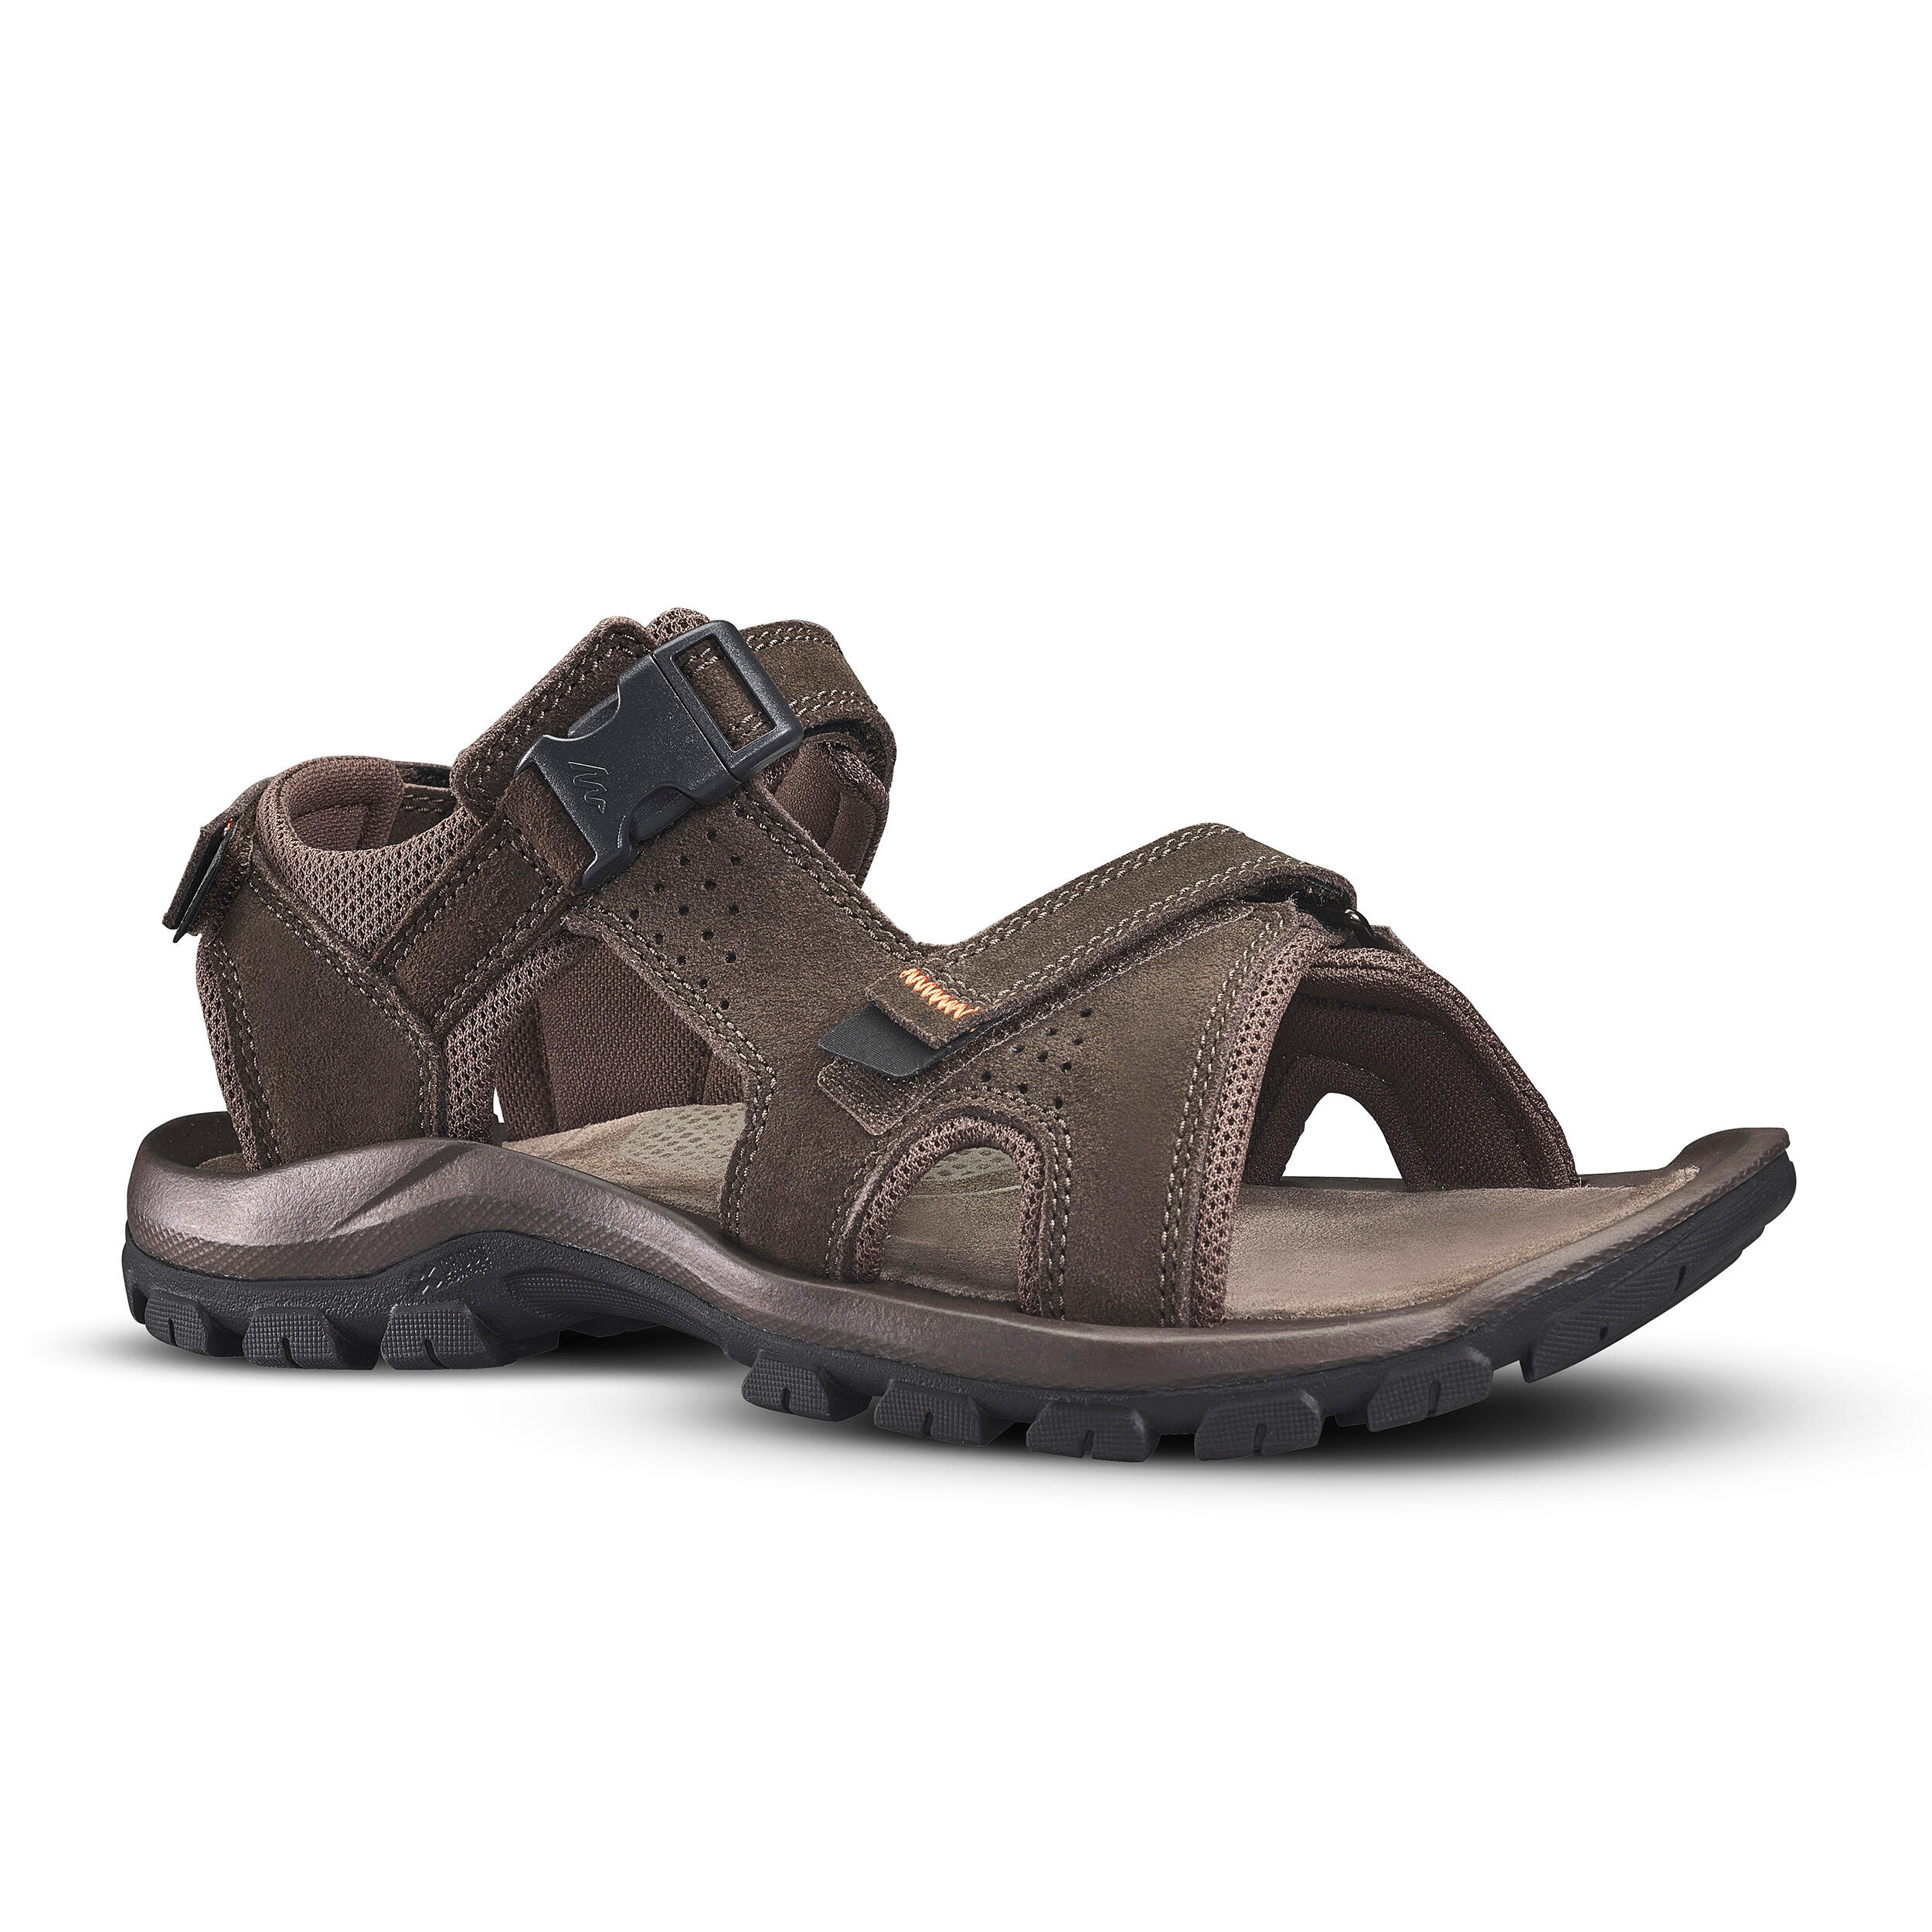 Men's Leather Hiking Sandals NH120 - QUECHUA